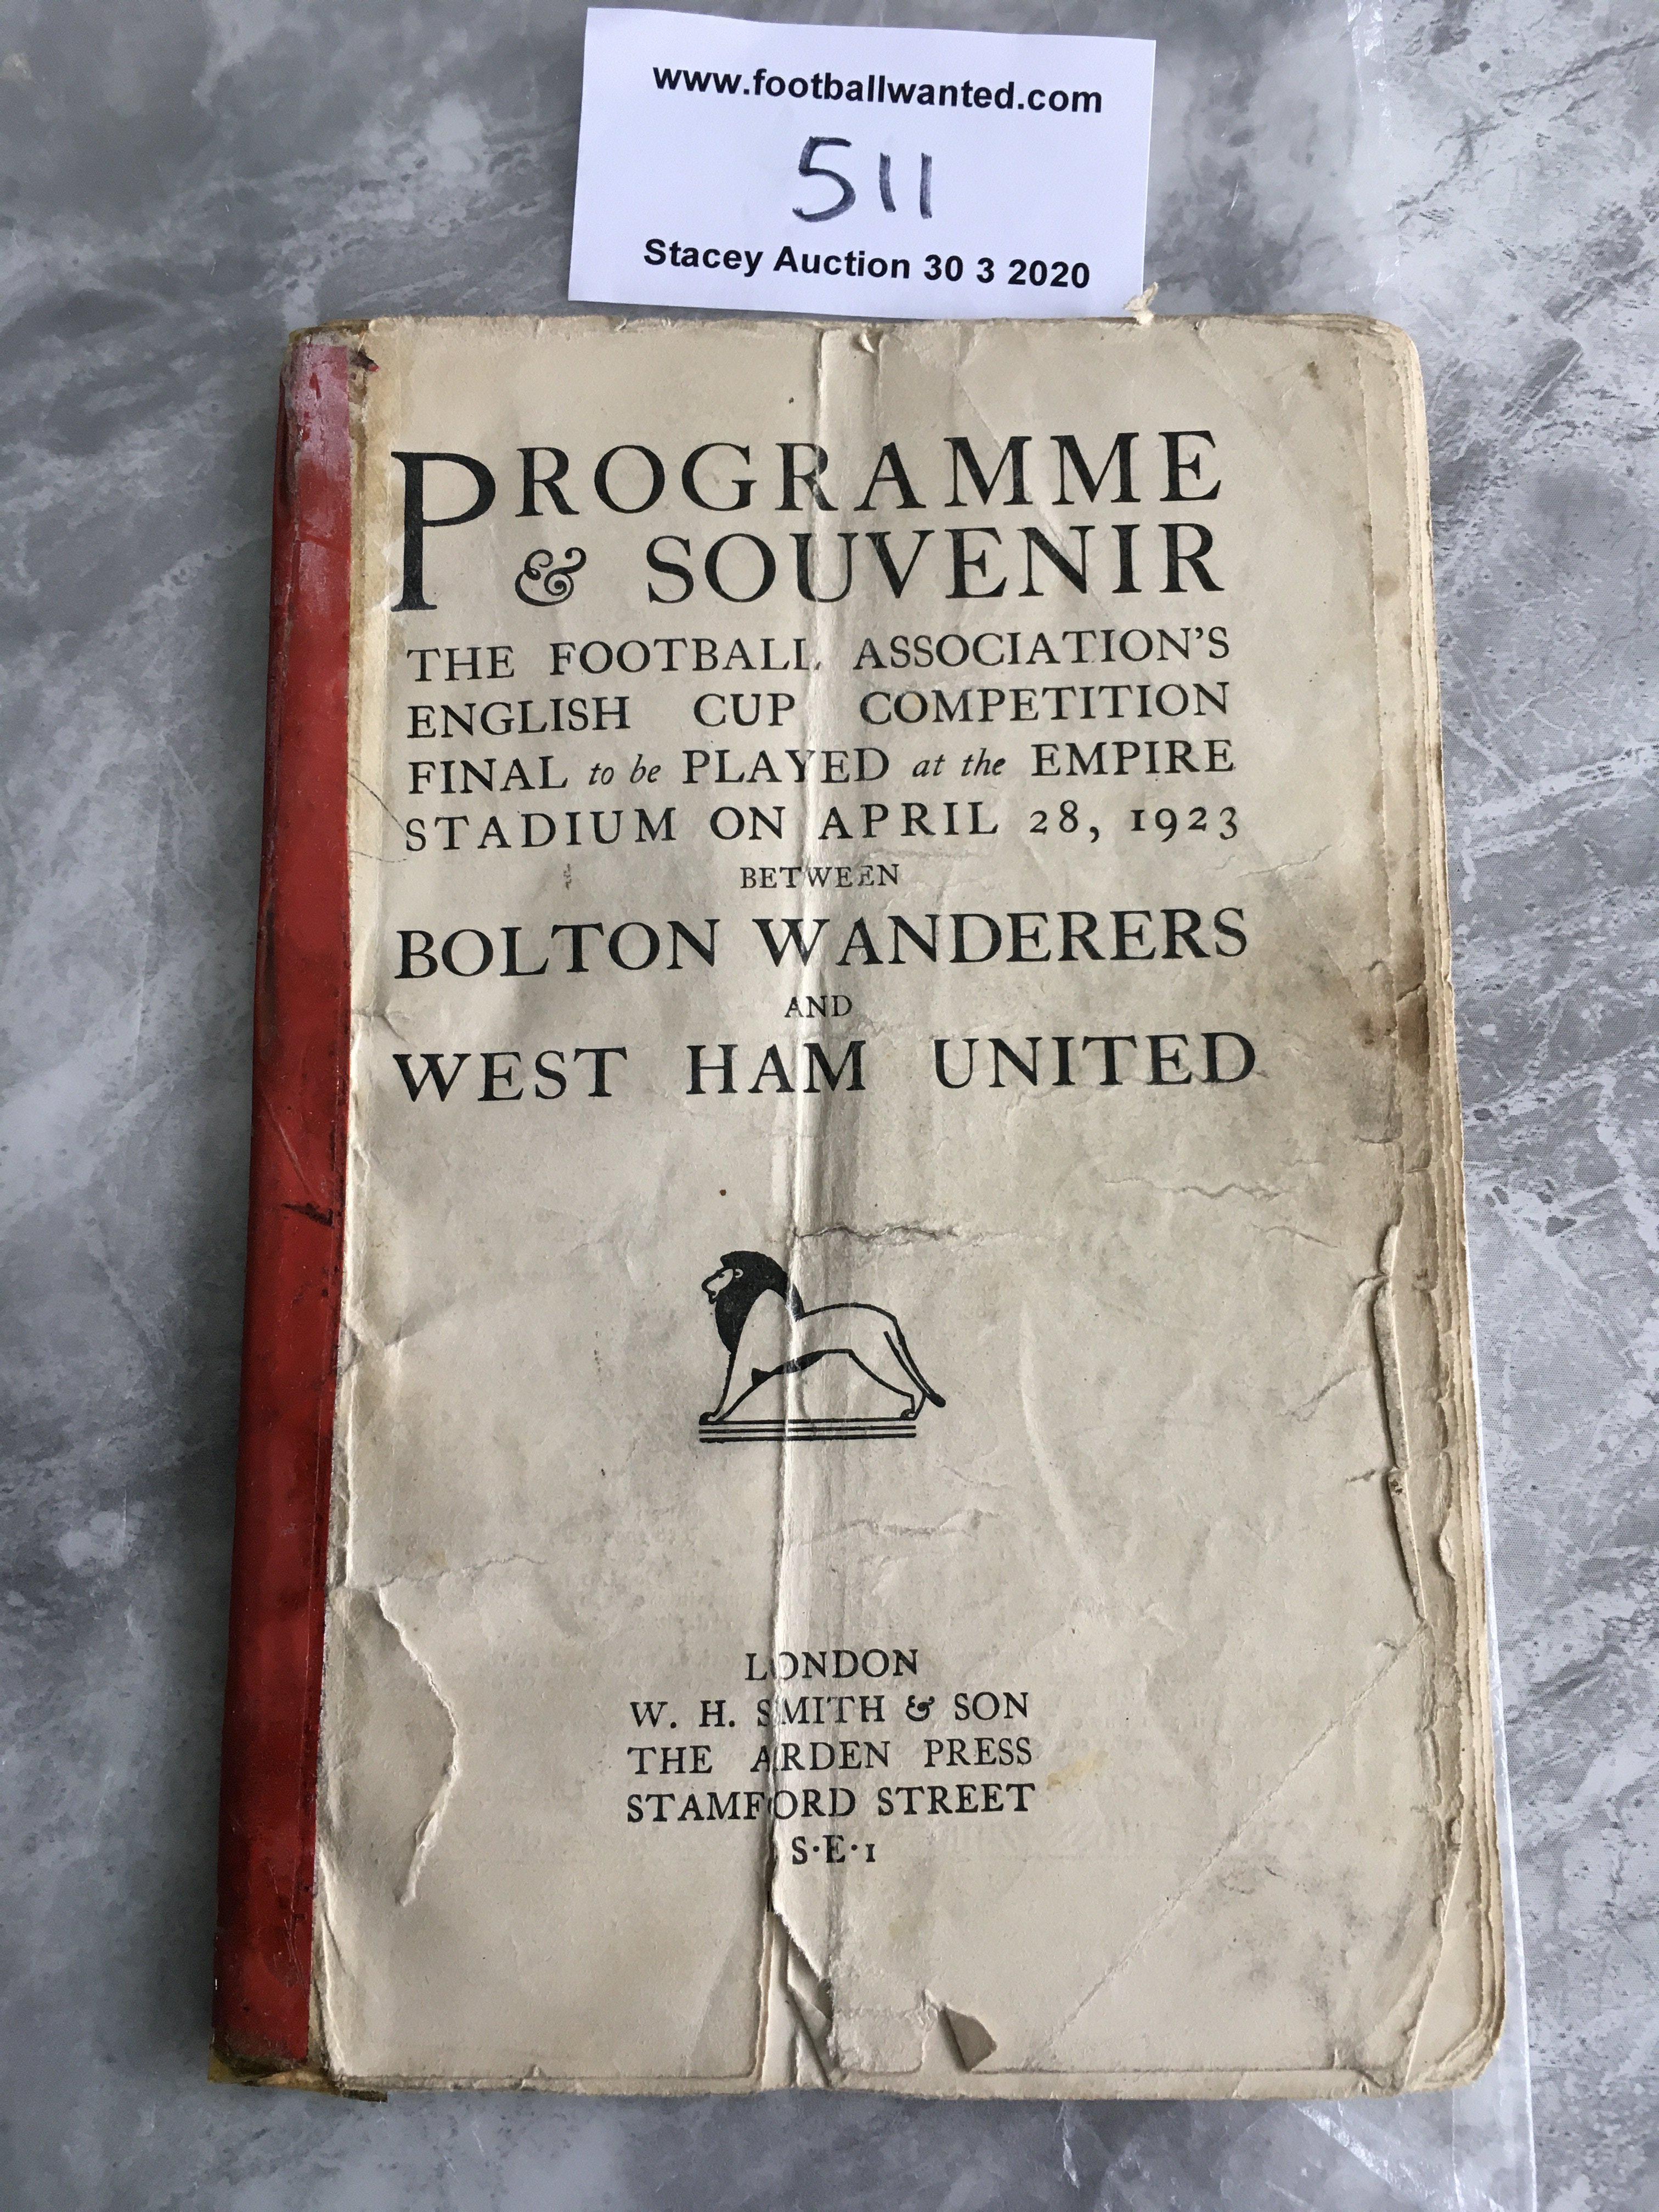 1923 FA Cup Final Football Programme: Bolton Wanderers v West Ham in very poor condition without